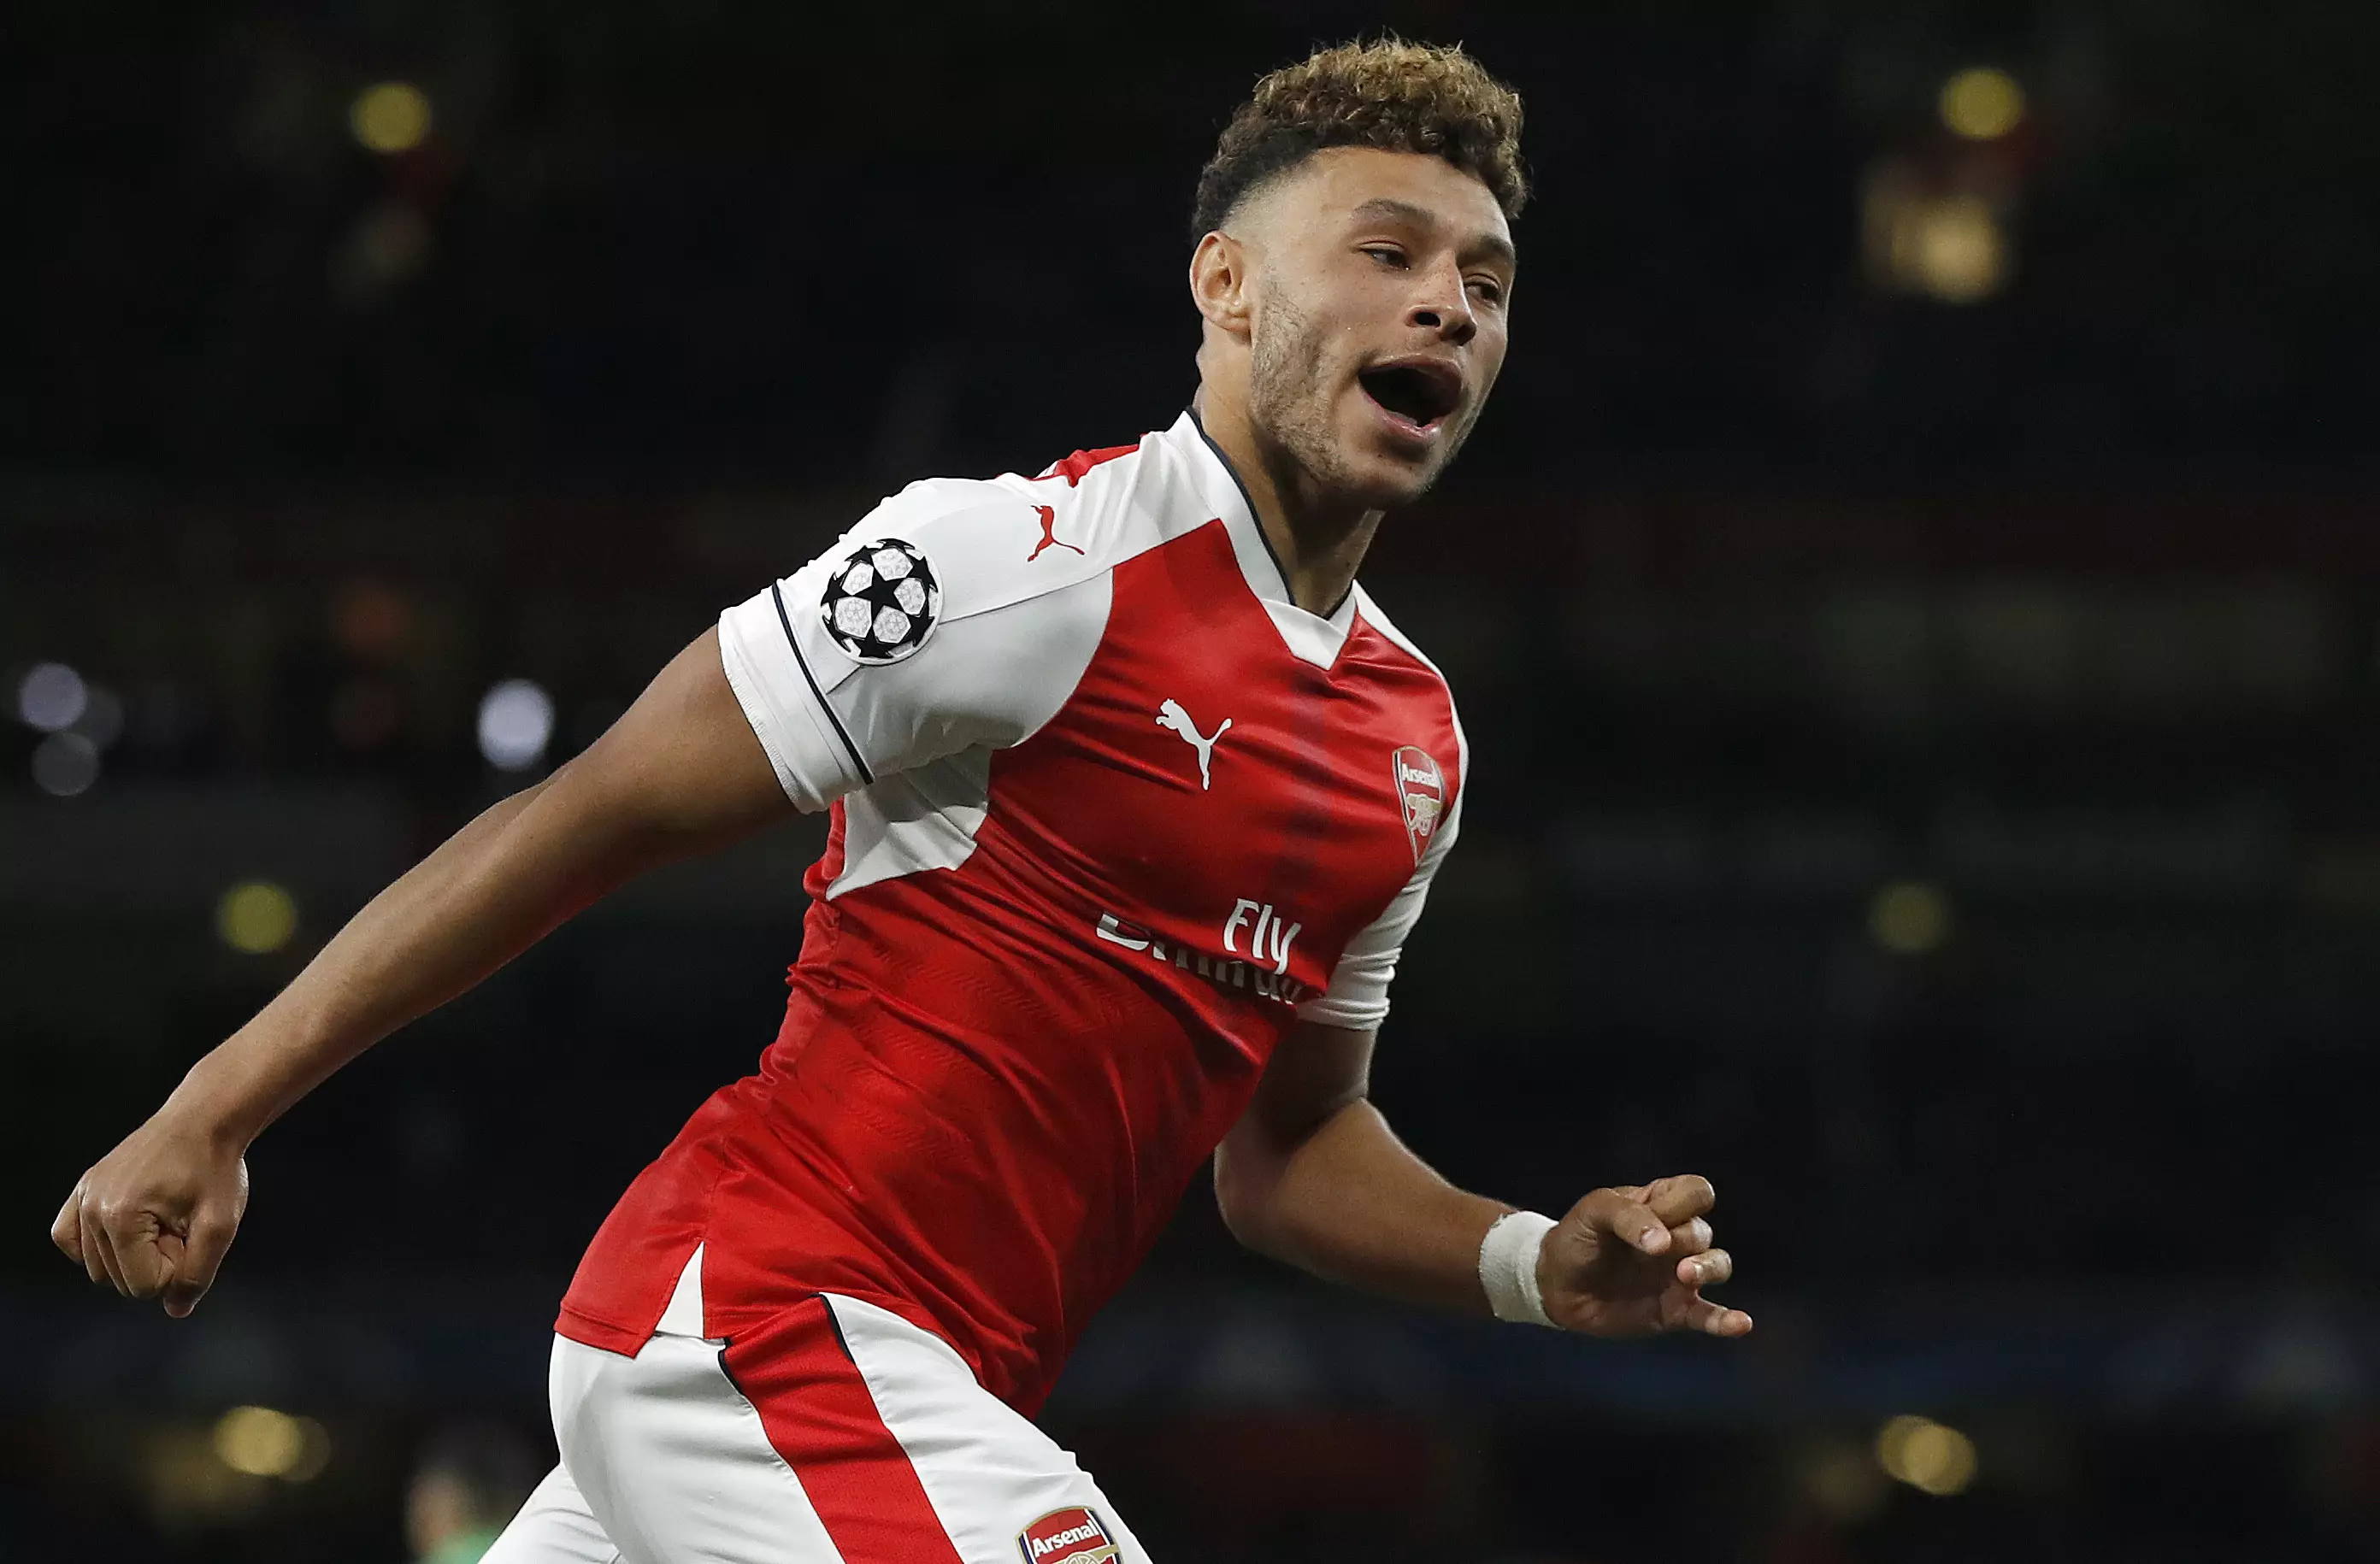 Arsenal's Alex Oxlade-Chamberlain Attracting Interest From La Liga Clubs